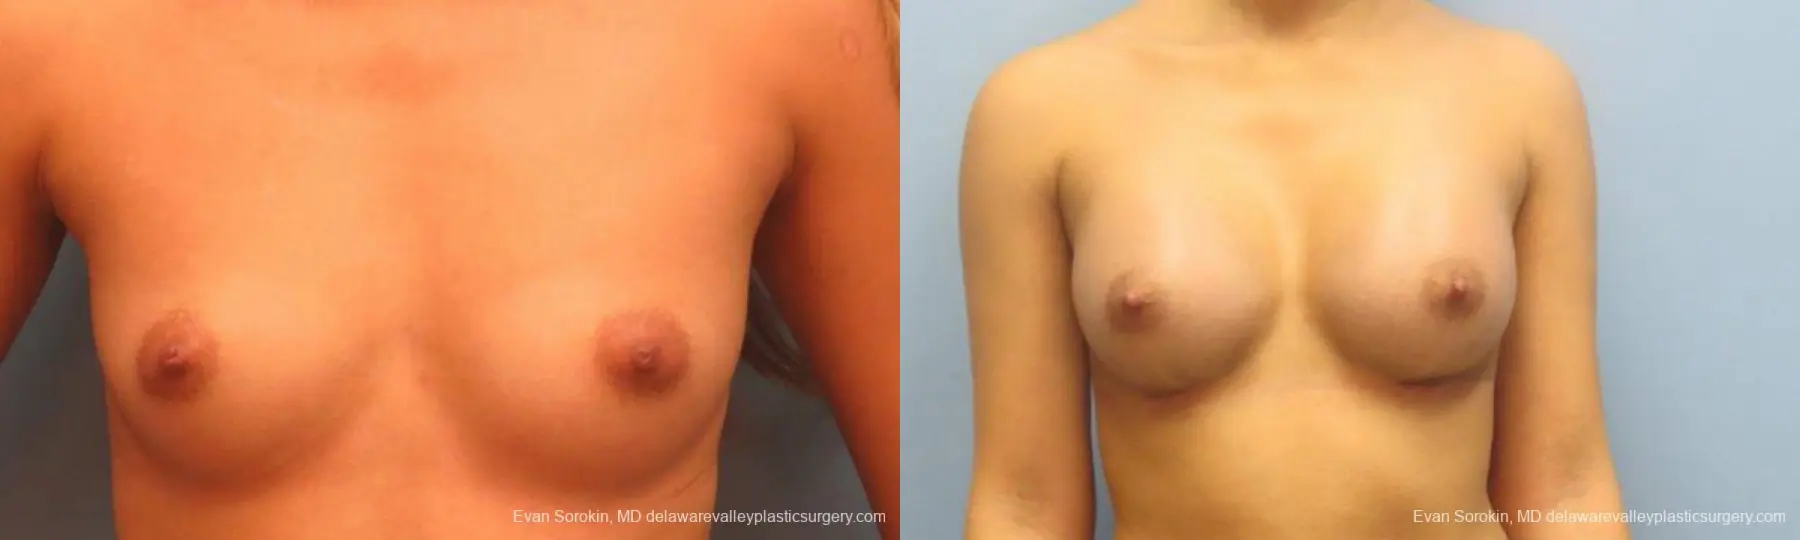 Philadelphia Breast Augmentation 9341 - Before and After 1